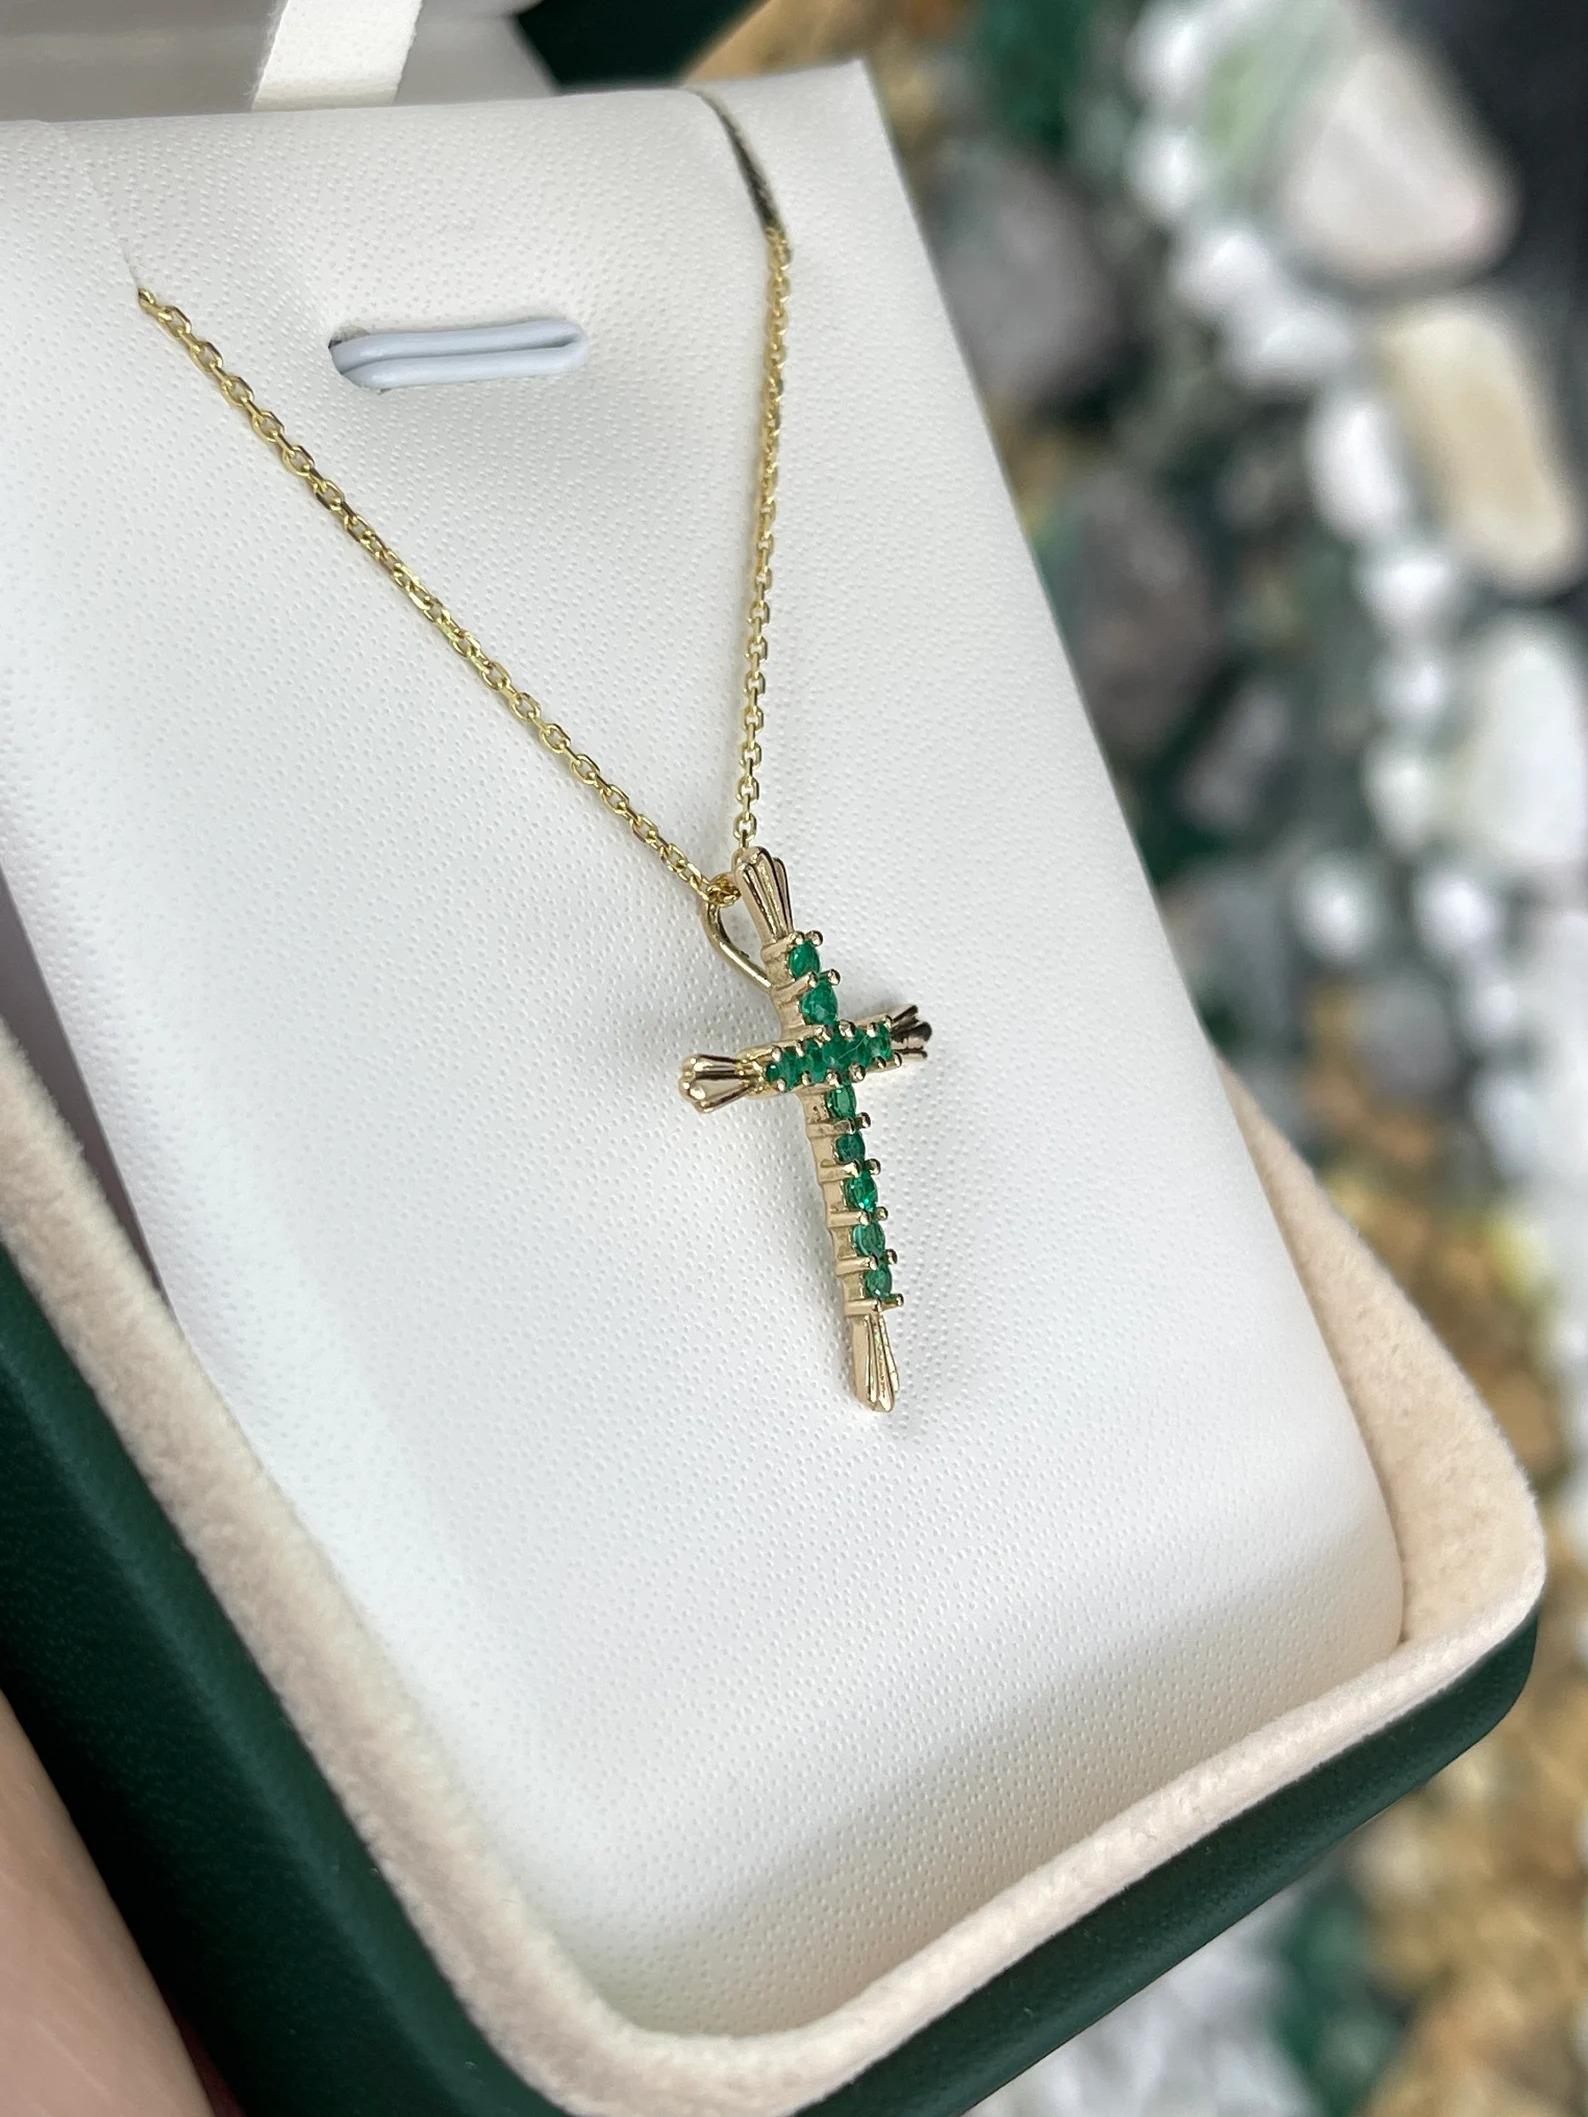 gold cross necklace with emerald stone